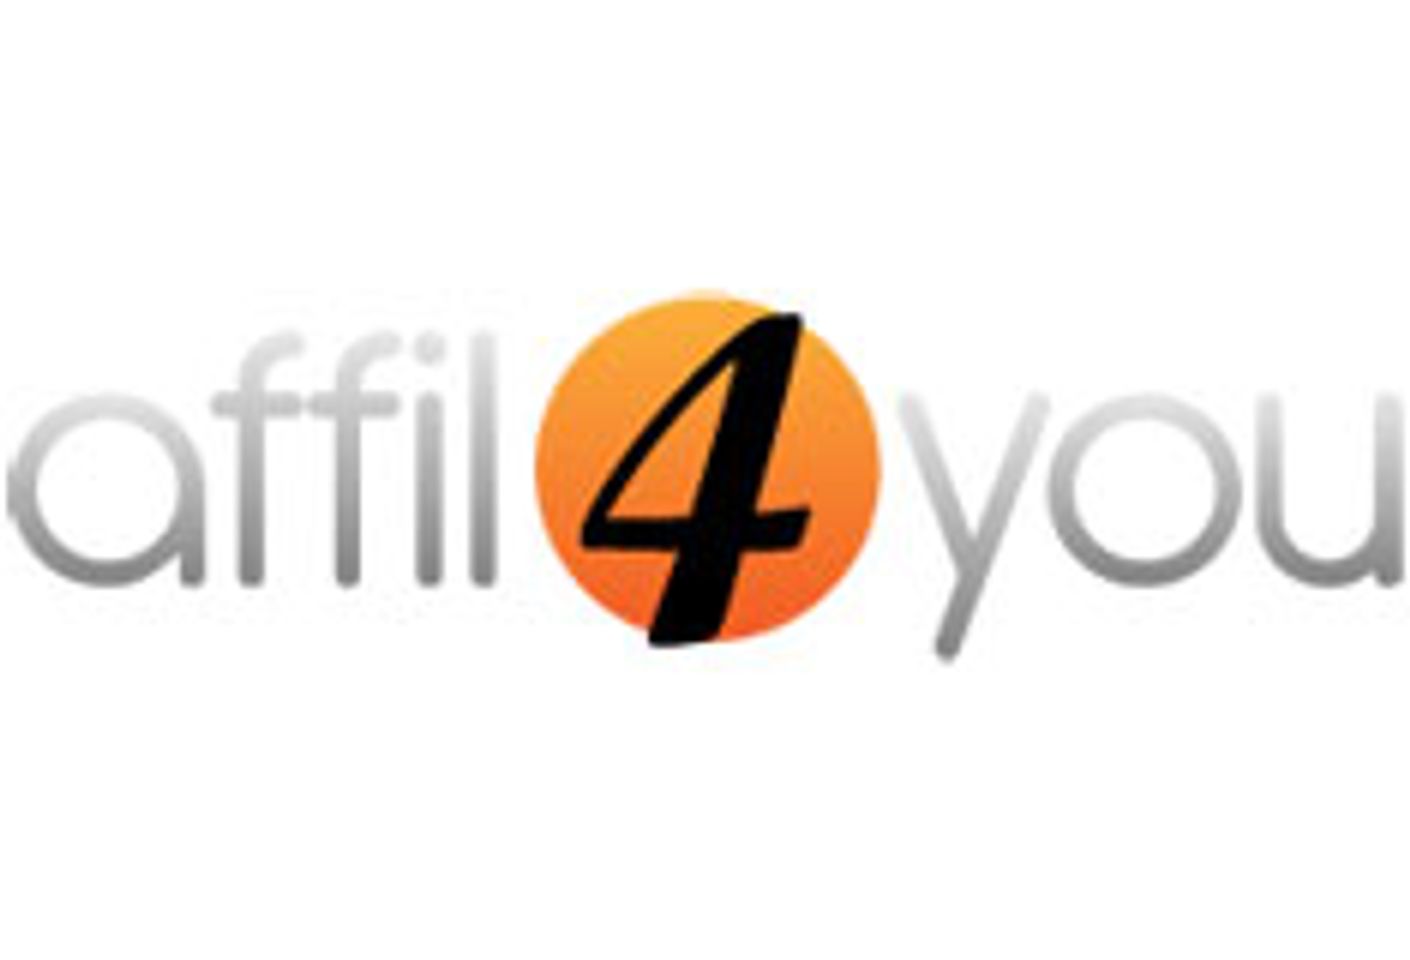 Affil4You Now Offers Italian Mobile Traffic Redirects, Billing